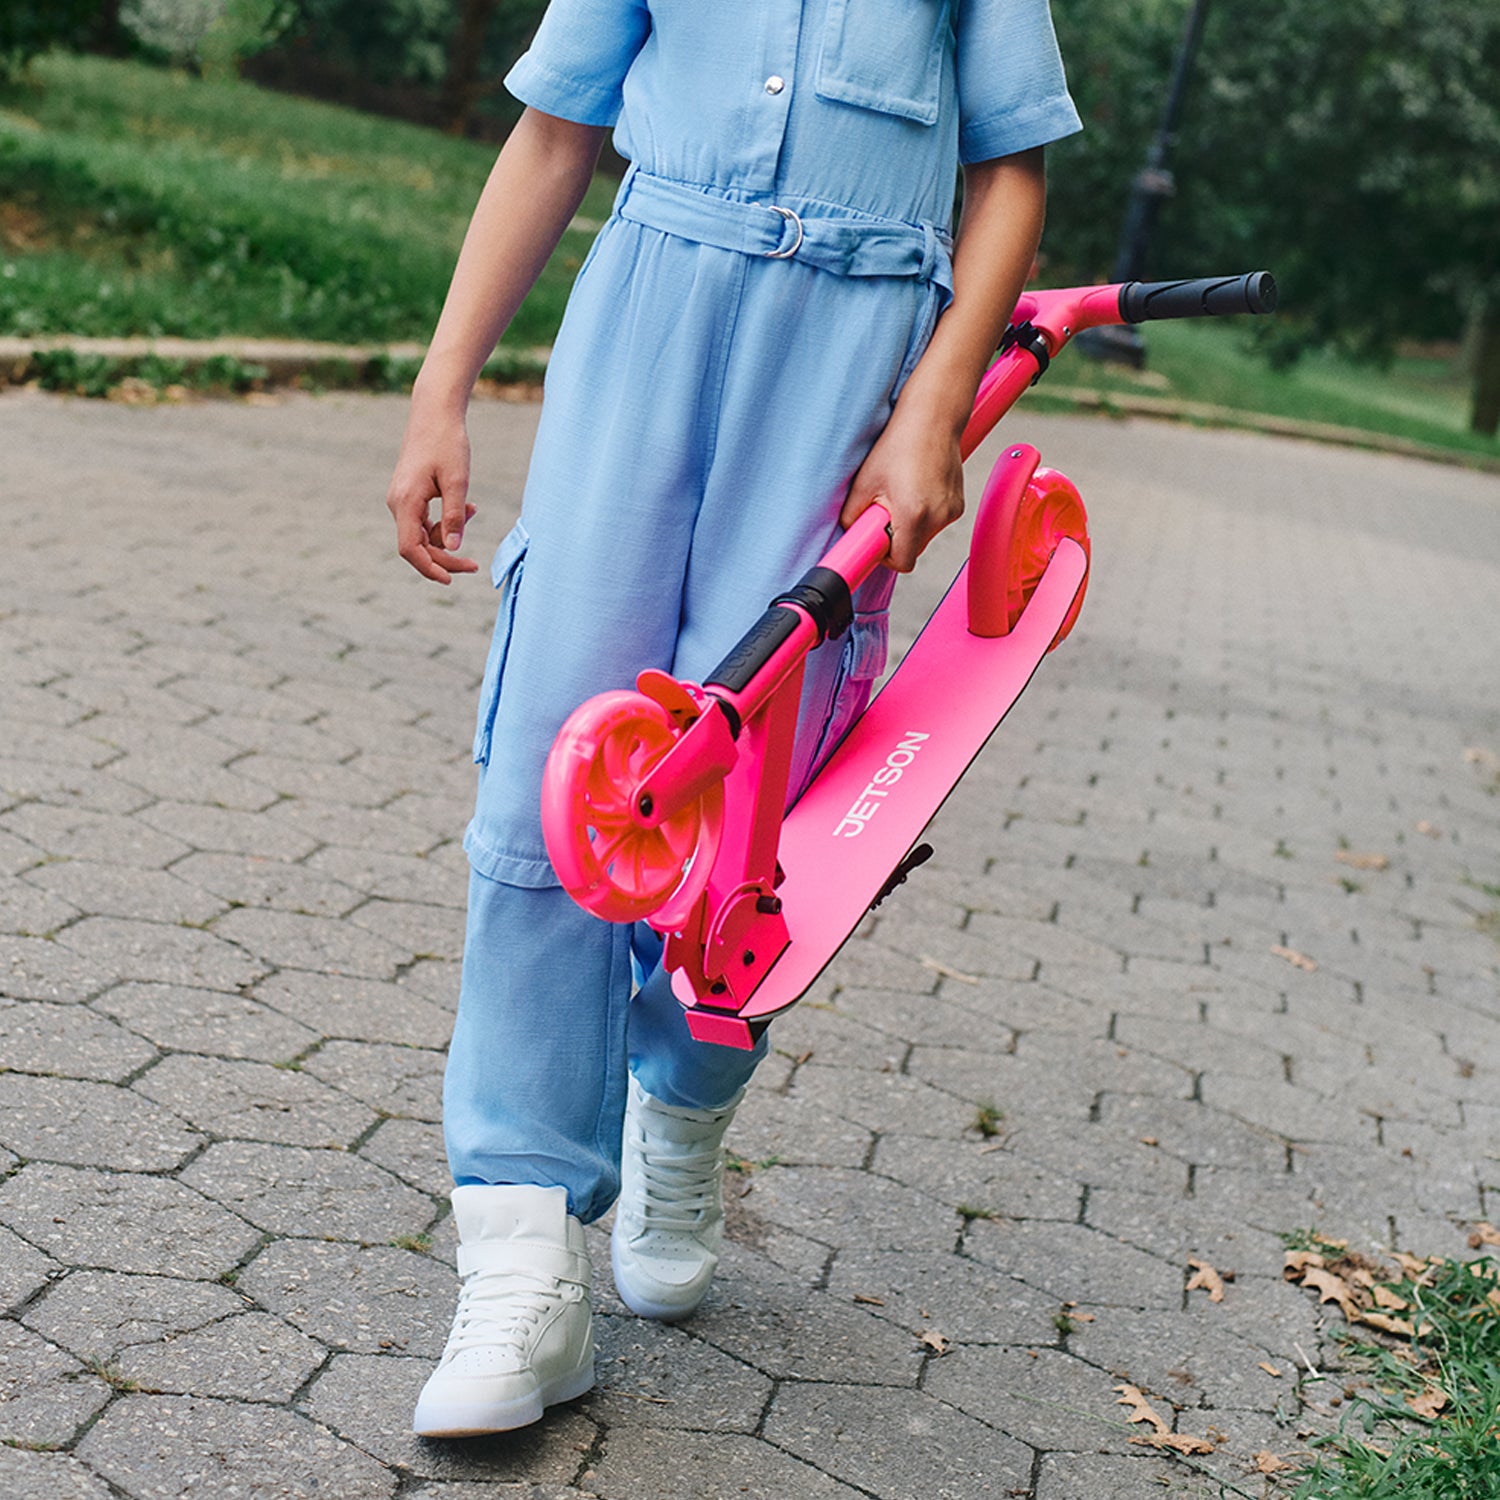 kid carrying folded pink highlight scooter